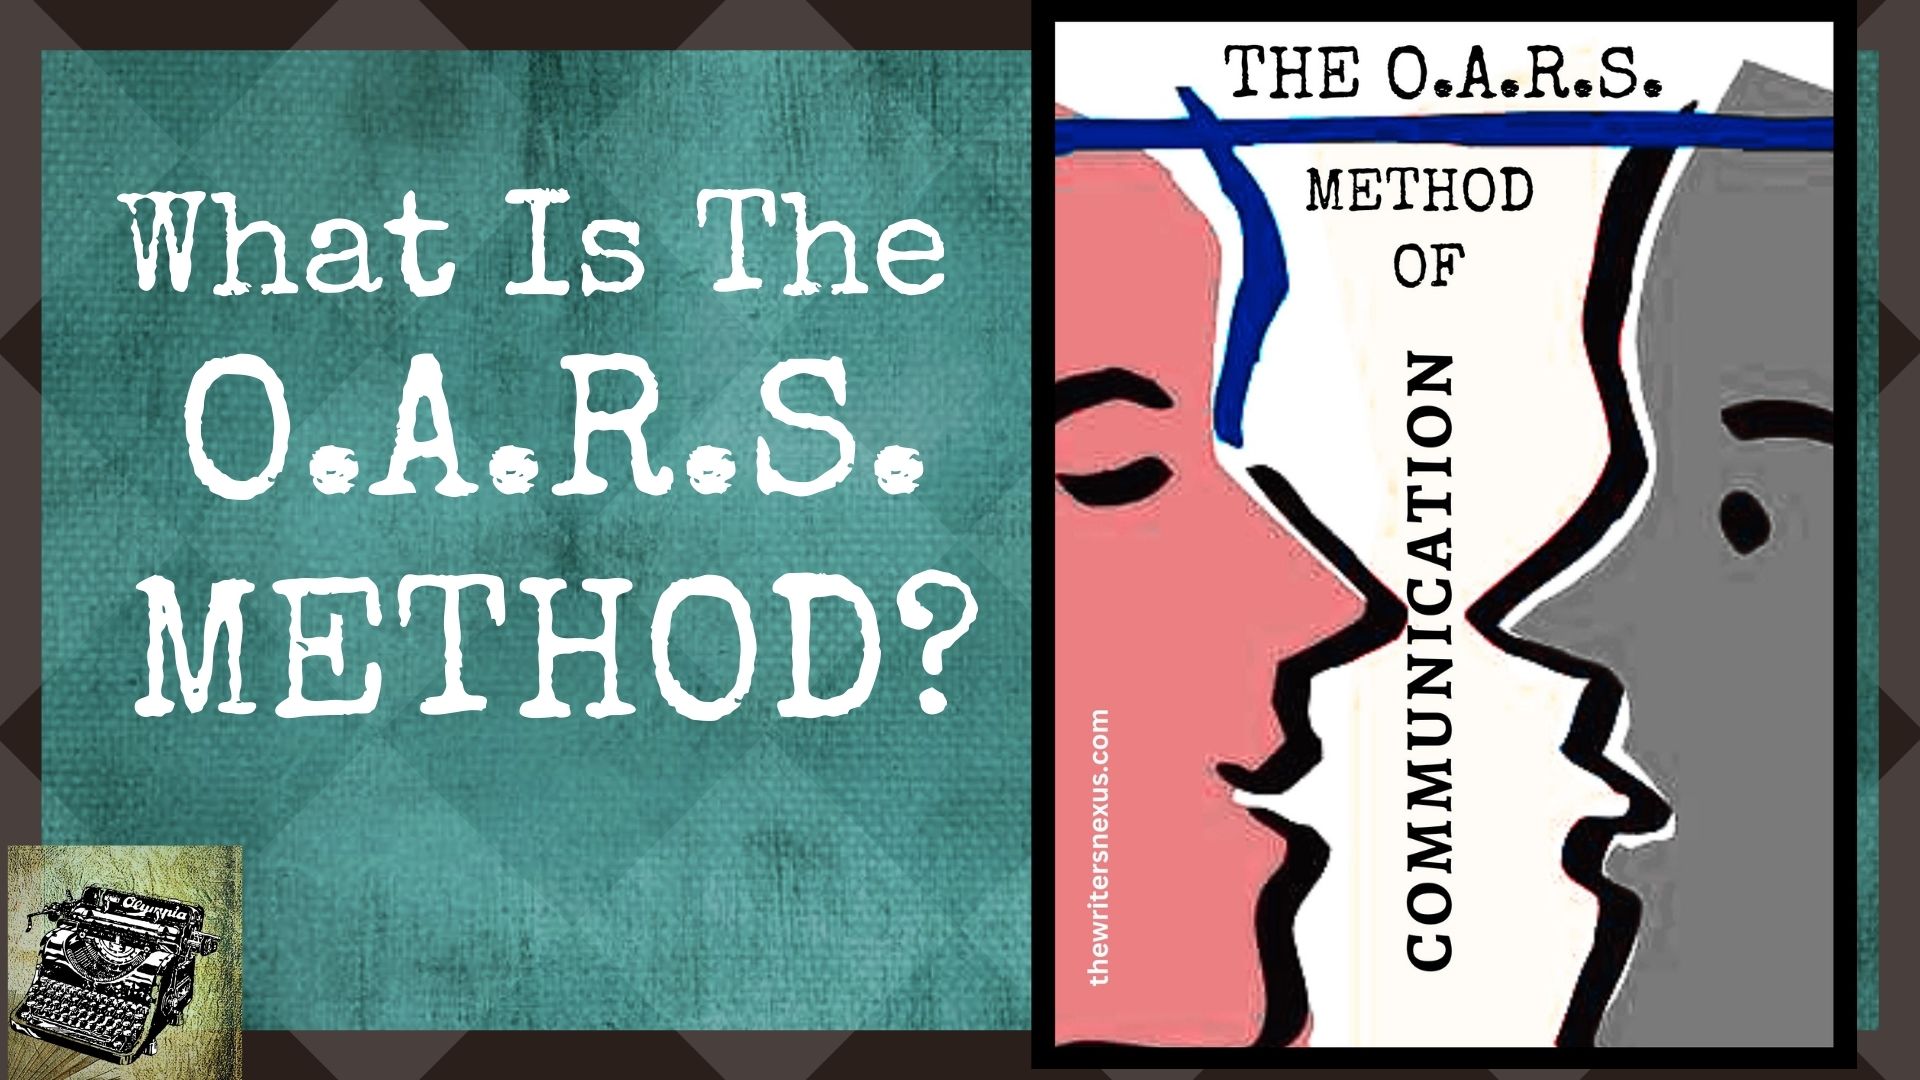 O.A.R.S. method, effective communication, how to be more creative